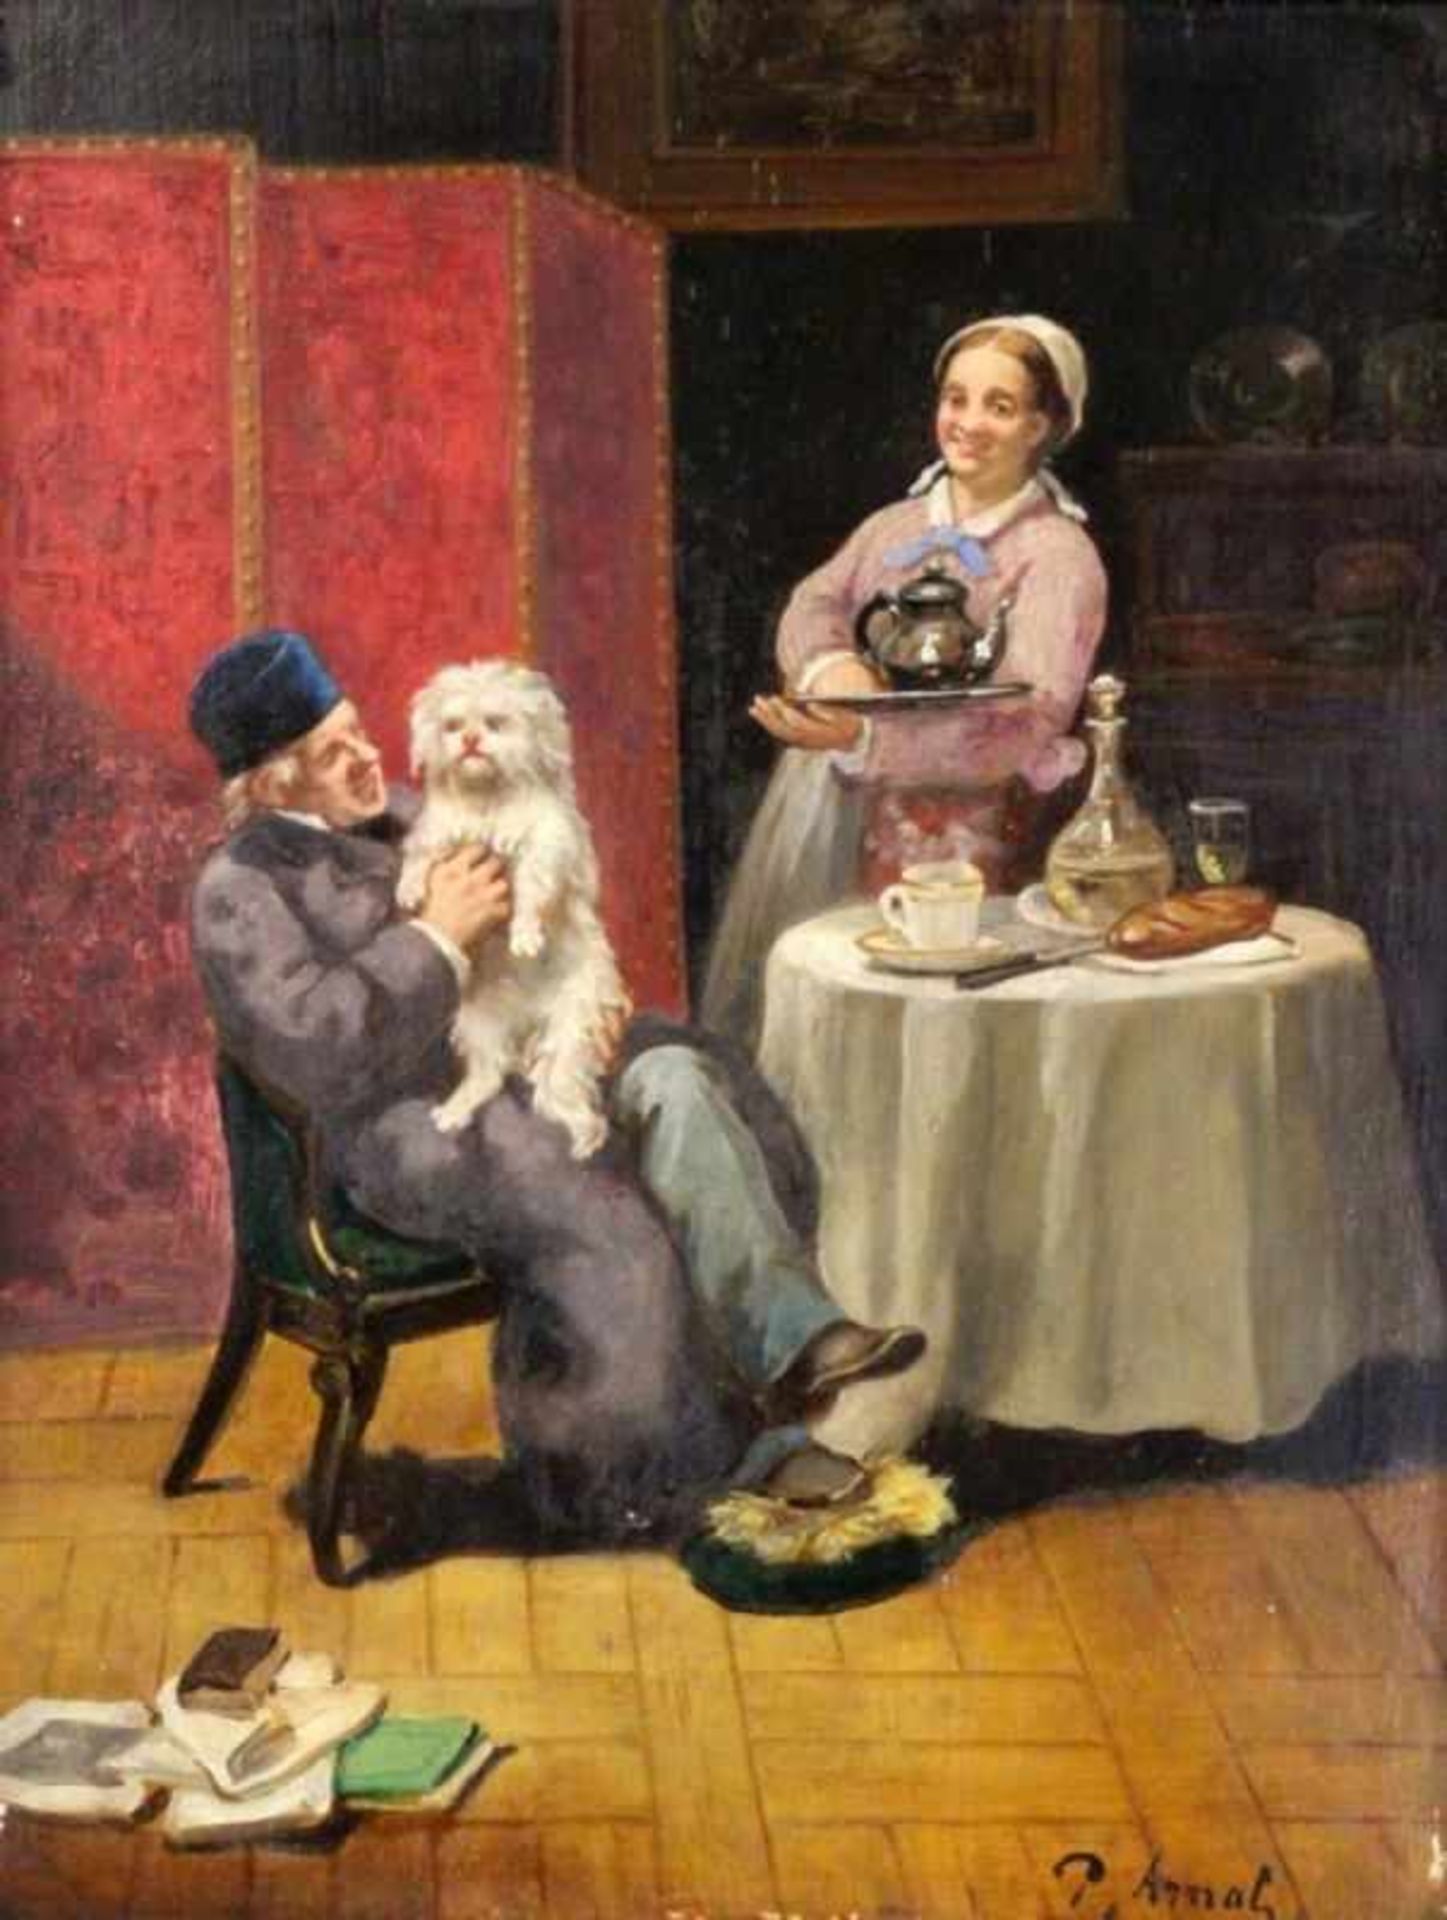 ARNAL, P. circa 1900 Couple with dog at the laid table. Oil on panel, signed. 34.5 x 26.5